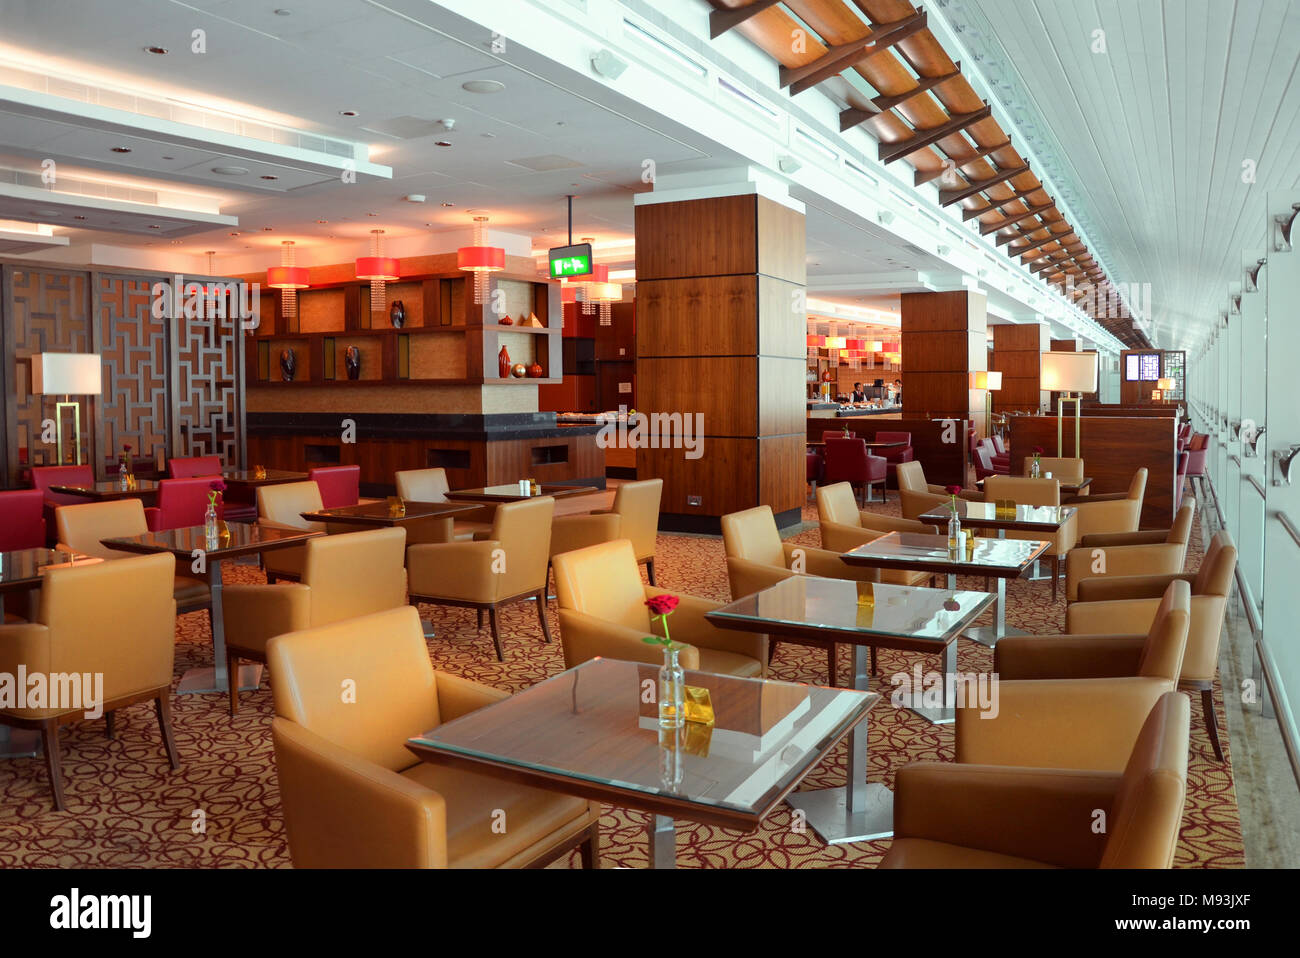 Dubai Airport, UAE - September 22, 2017: Luxury waiting areas in Bistro of Emirates Business Class Lounge Stock Photo